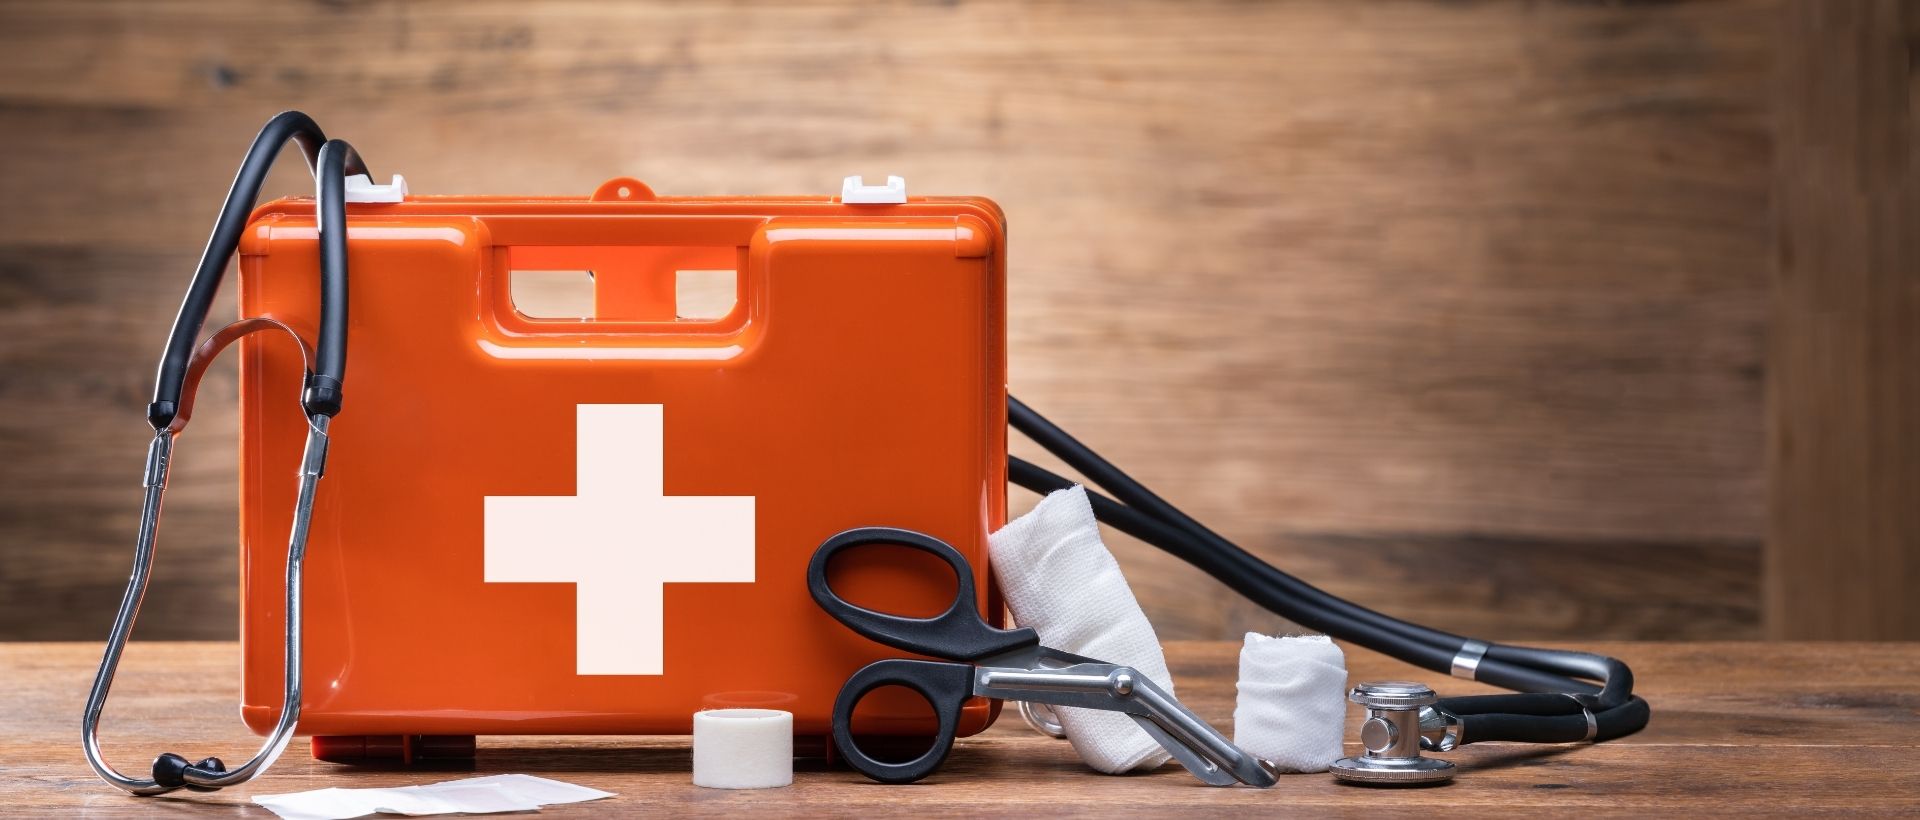 Essential First Aid Kits A Must-Have for Every Home and Workplace